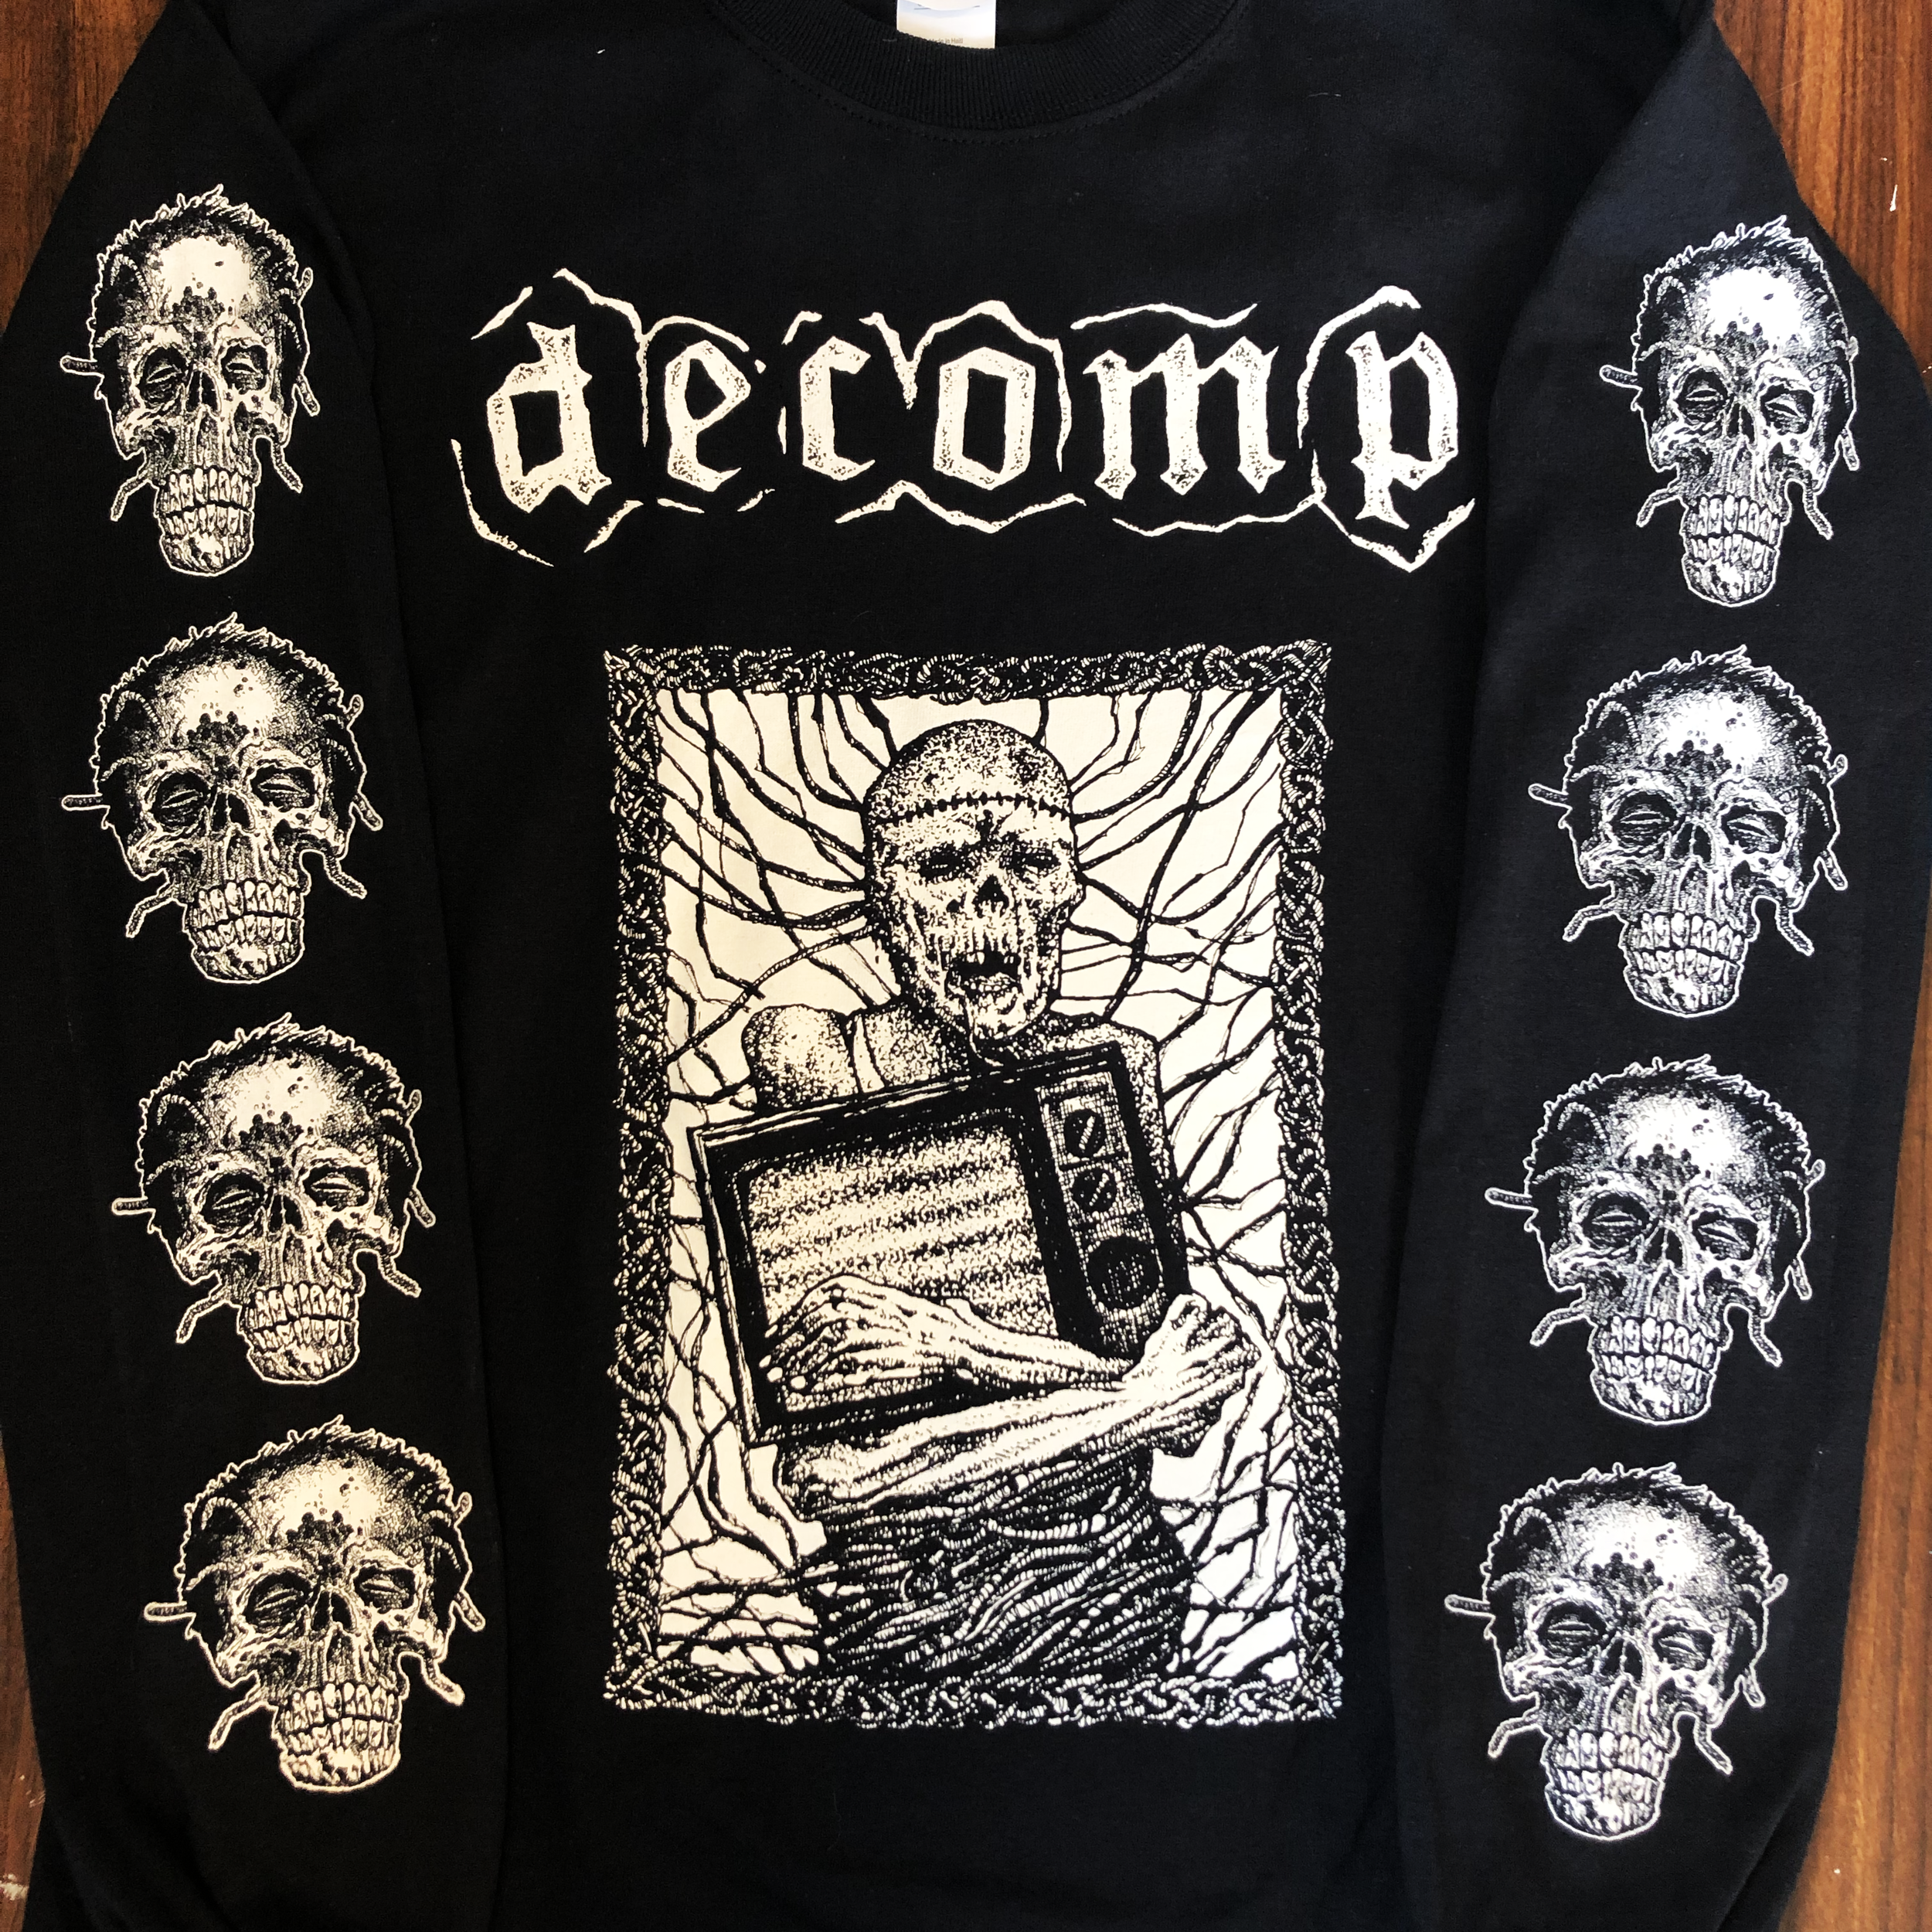  longsleeve discharge print for Decomp from Portland, OR. 2019 